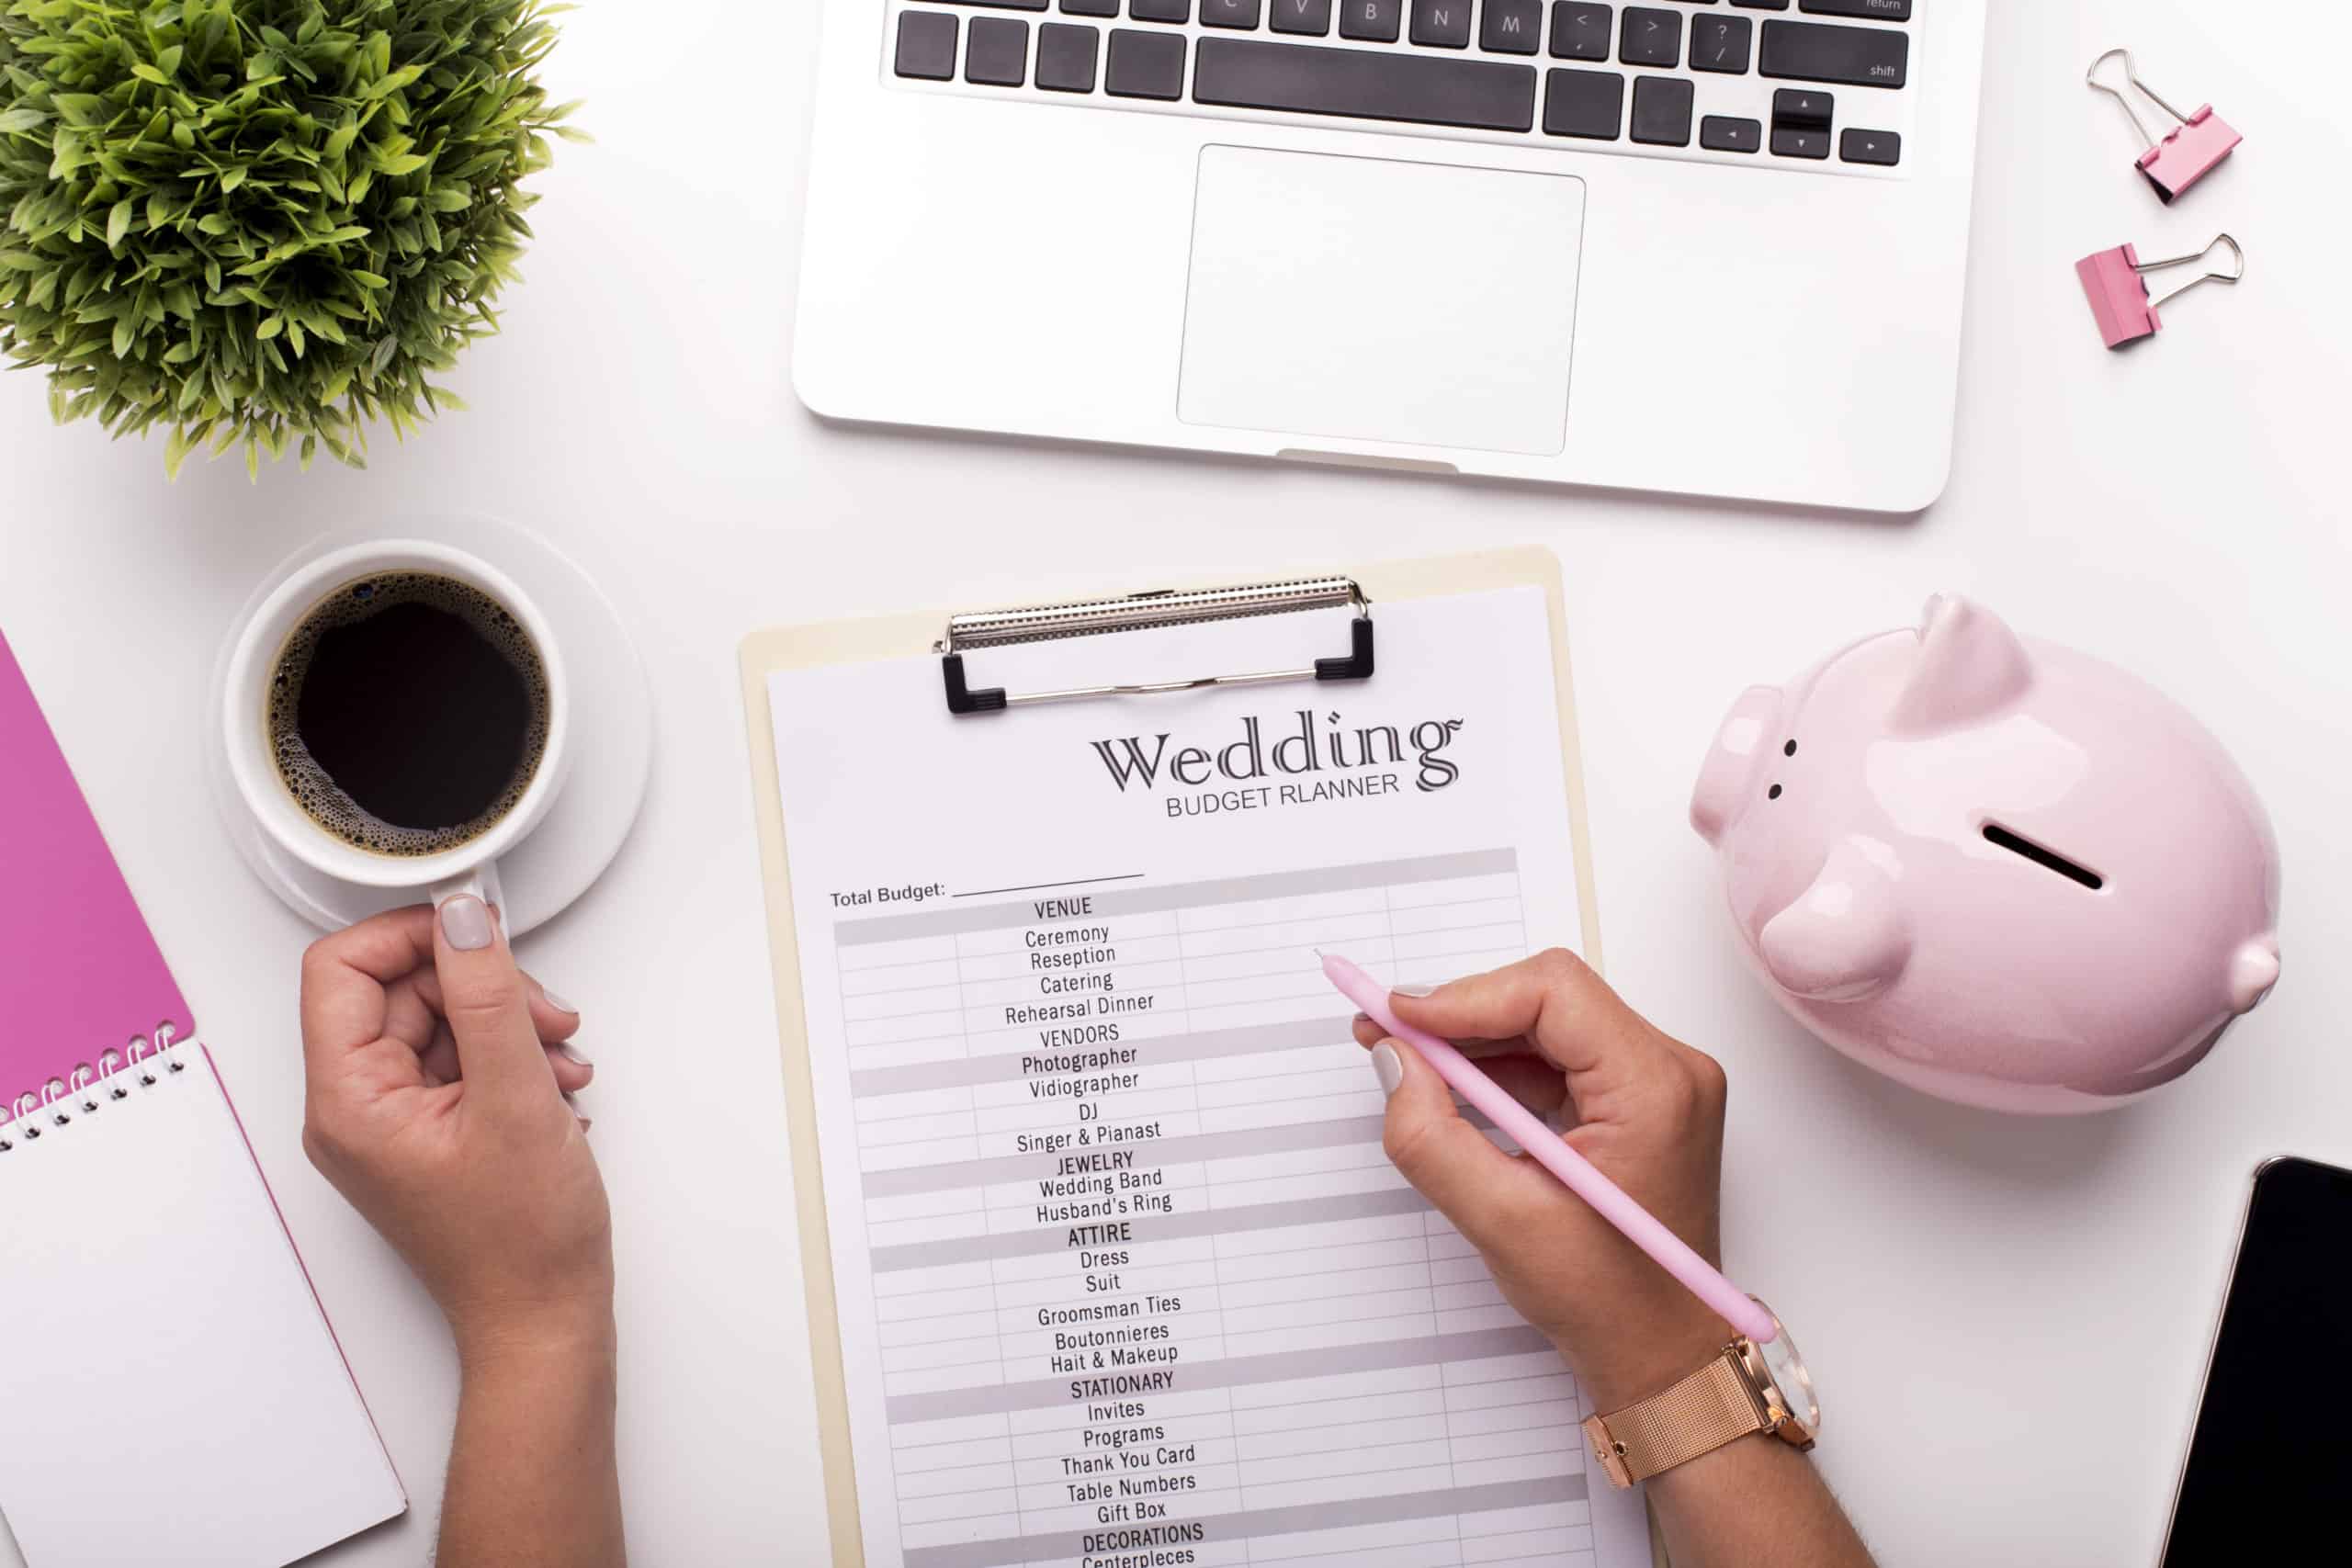 A woman making notes on a wedding checklist and budget planner.